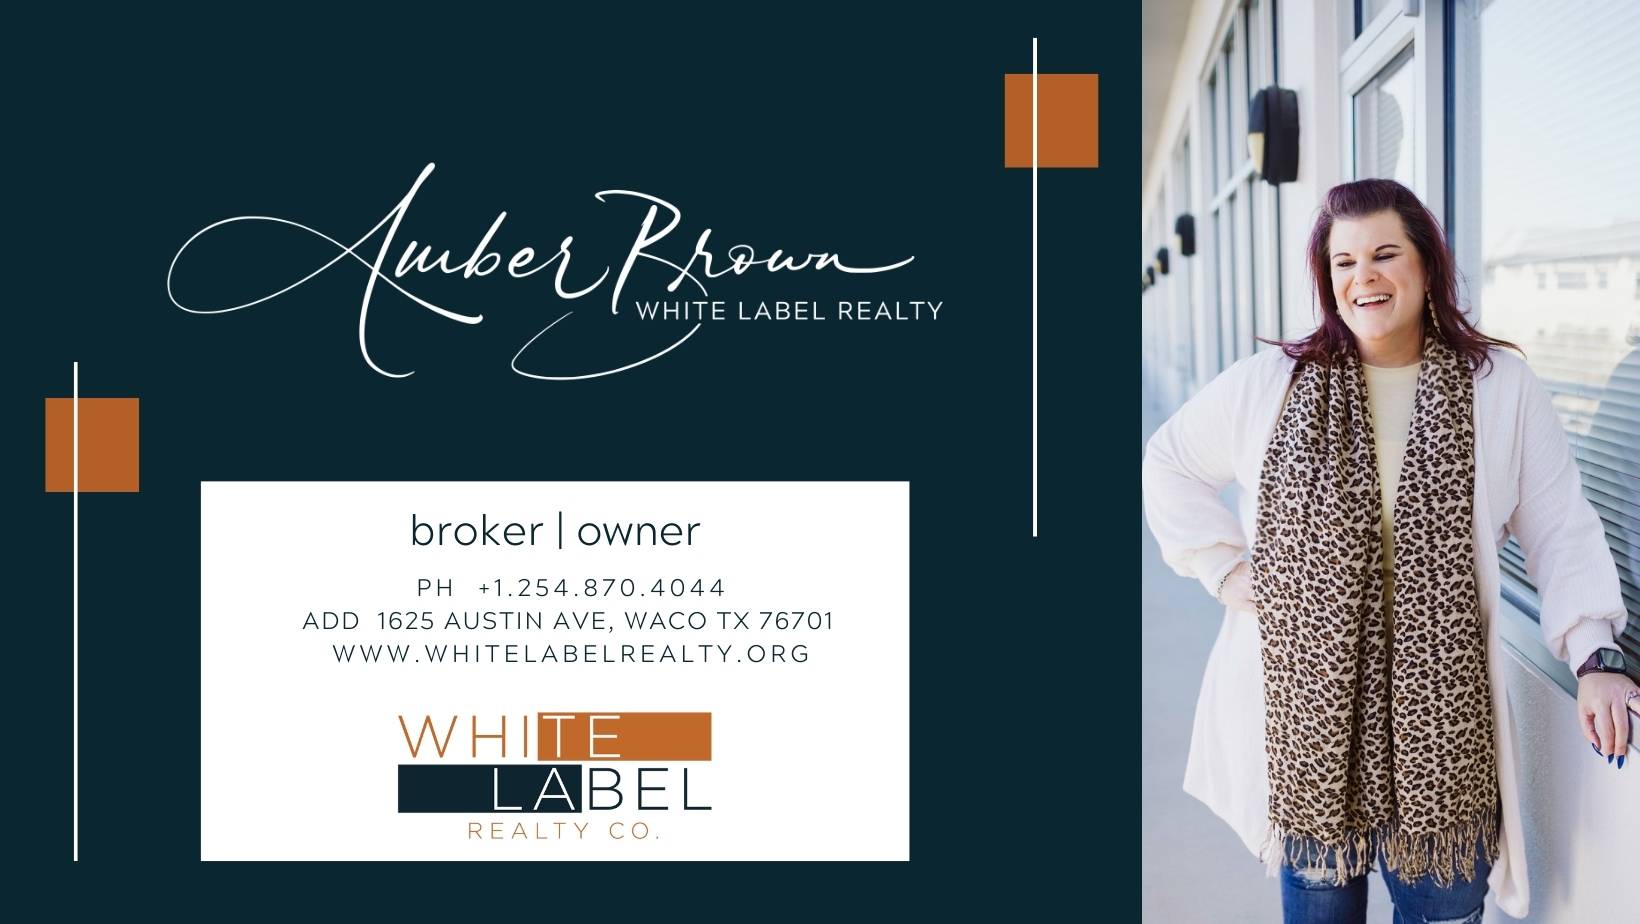 Amber Brown White Label Realty Co Waco Texas Realtor